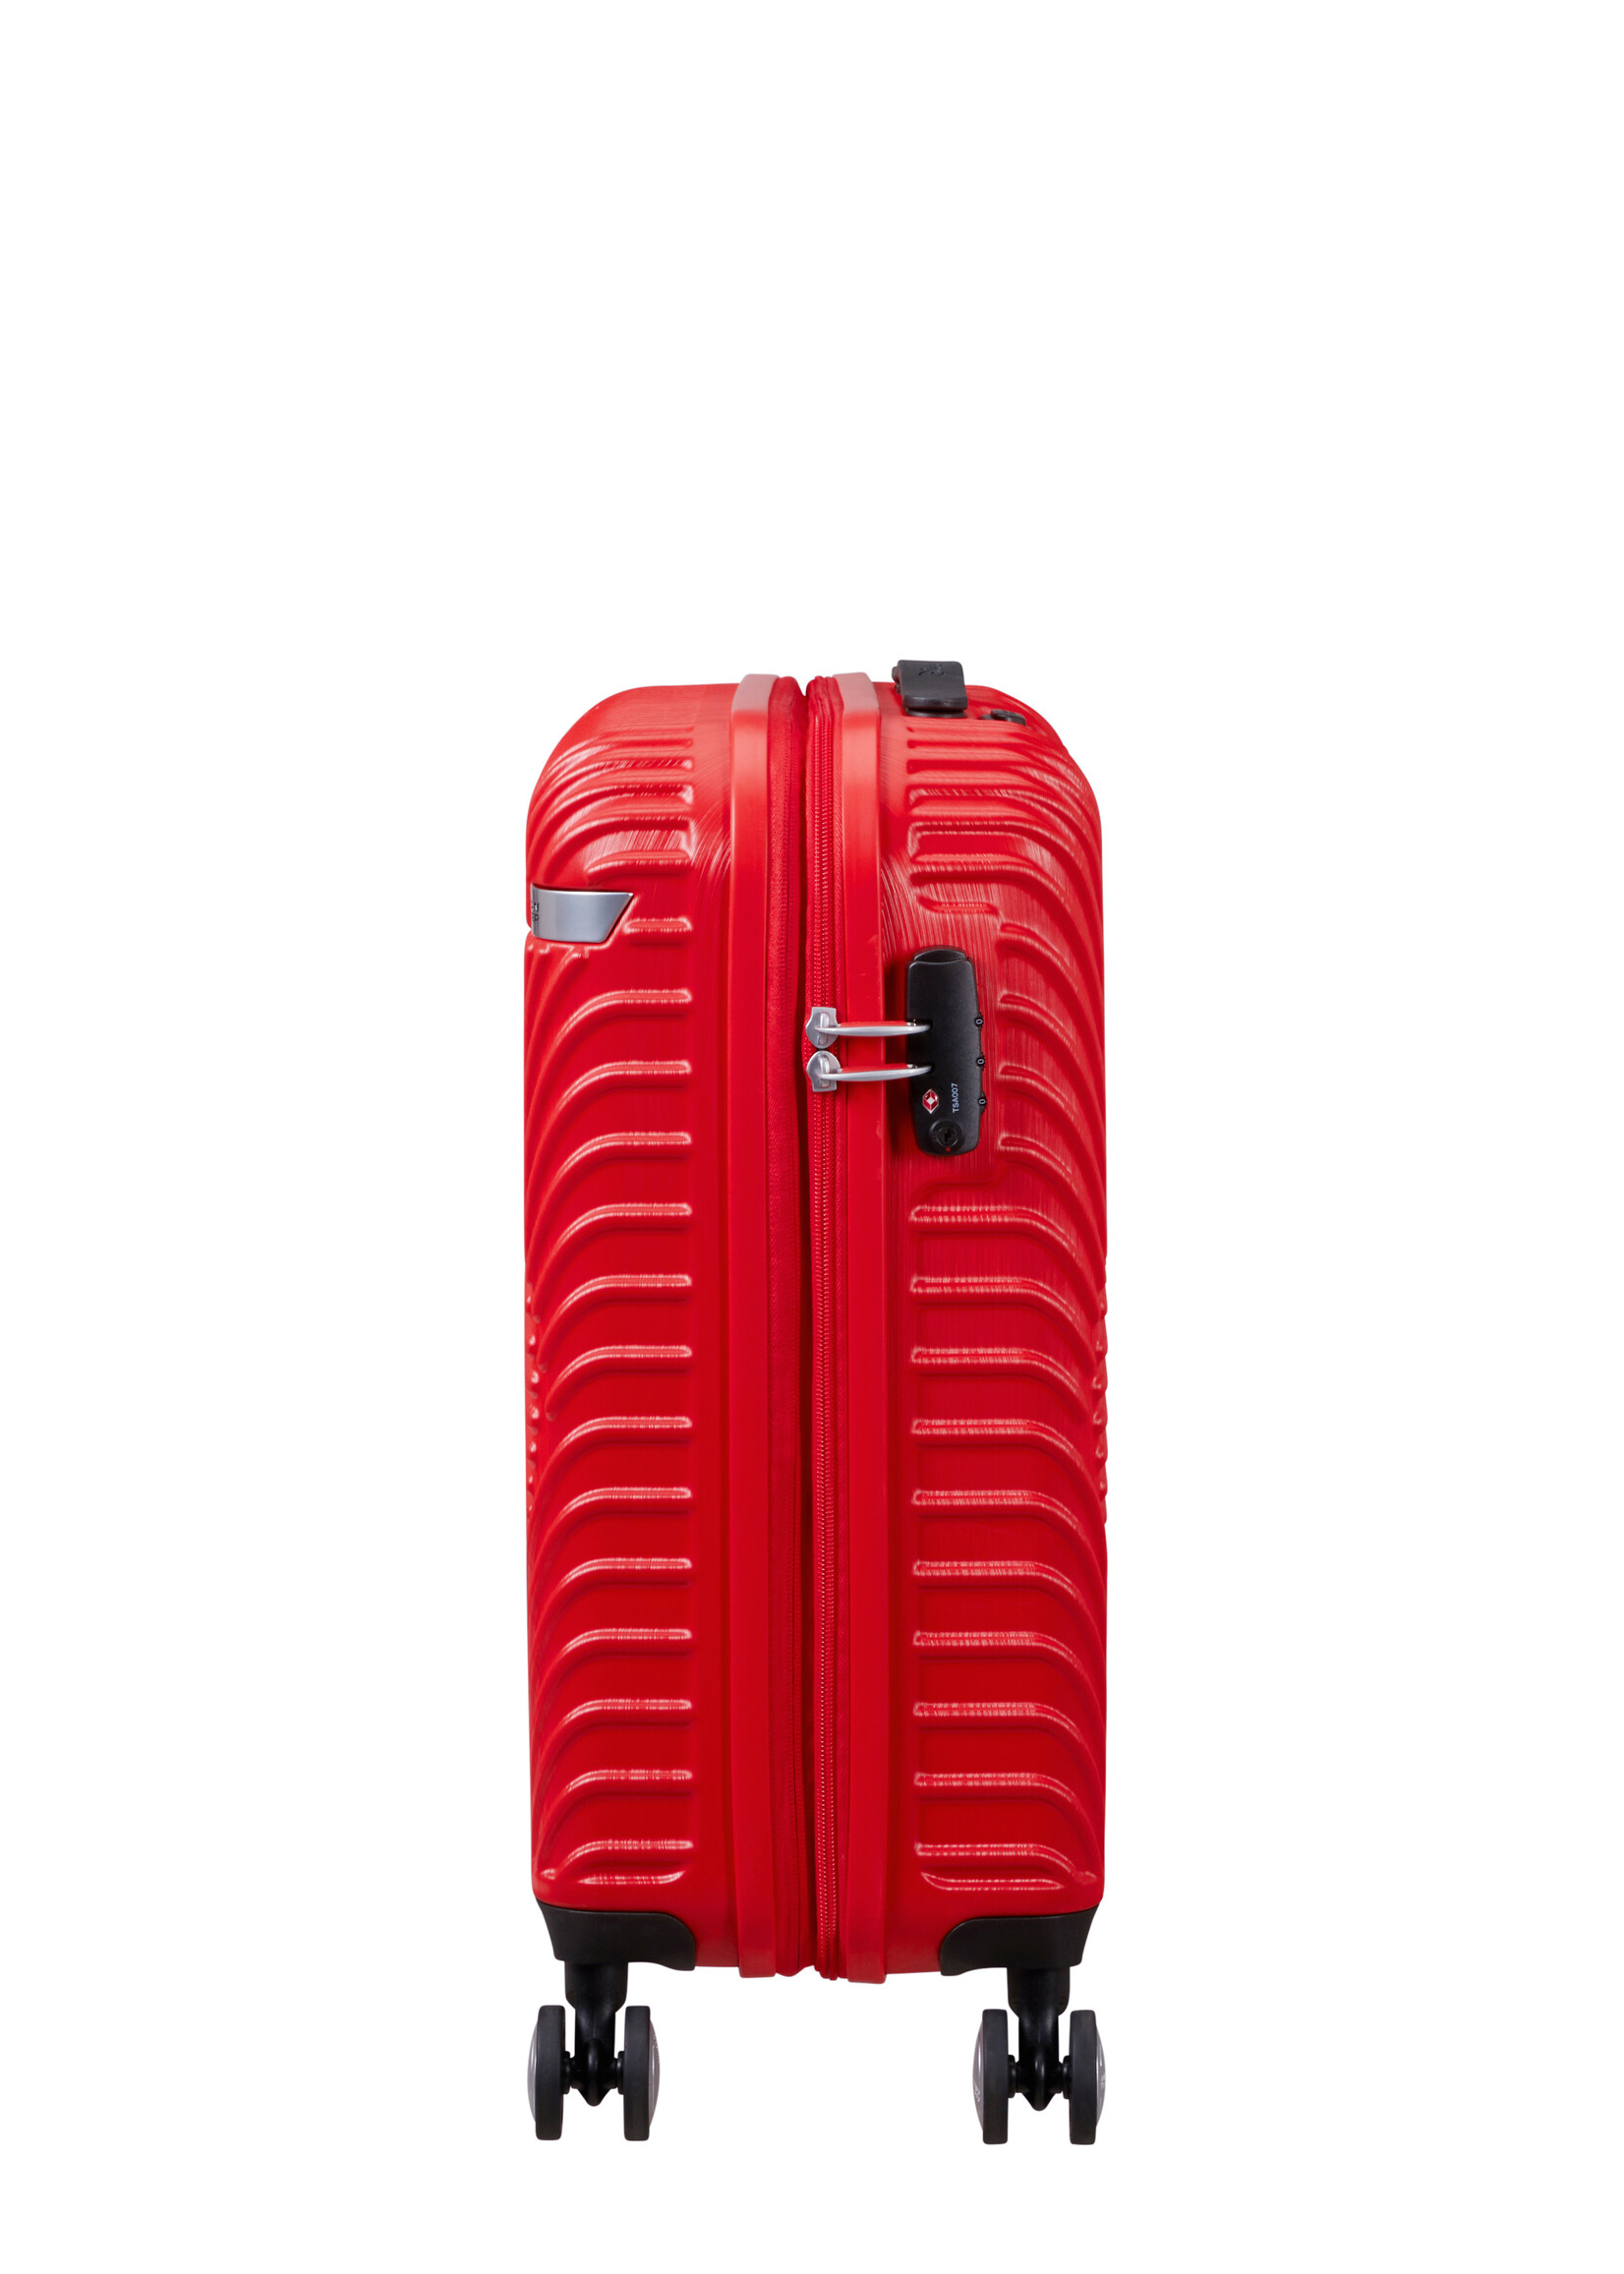 AMERICAN TOURISTER MICKEY CLOUDS SPINNER 55/20 EXP TSA MICKEY CLASSIC RED